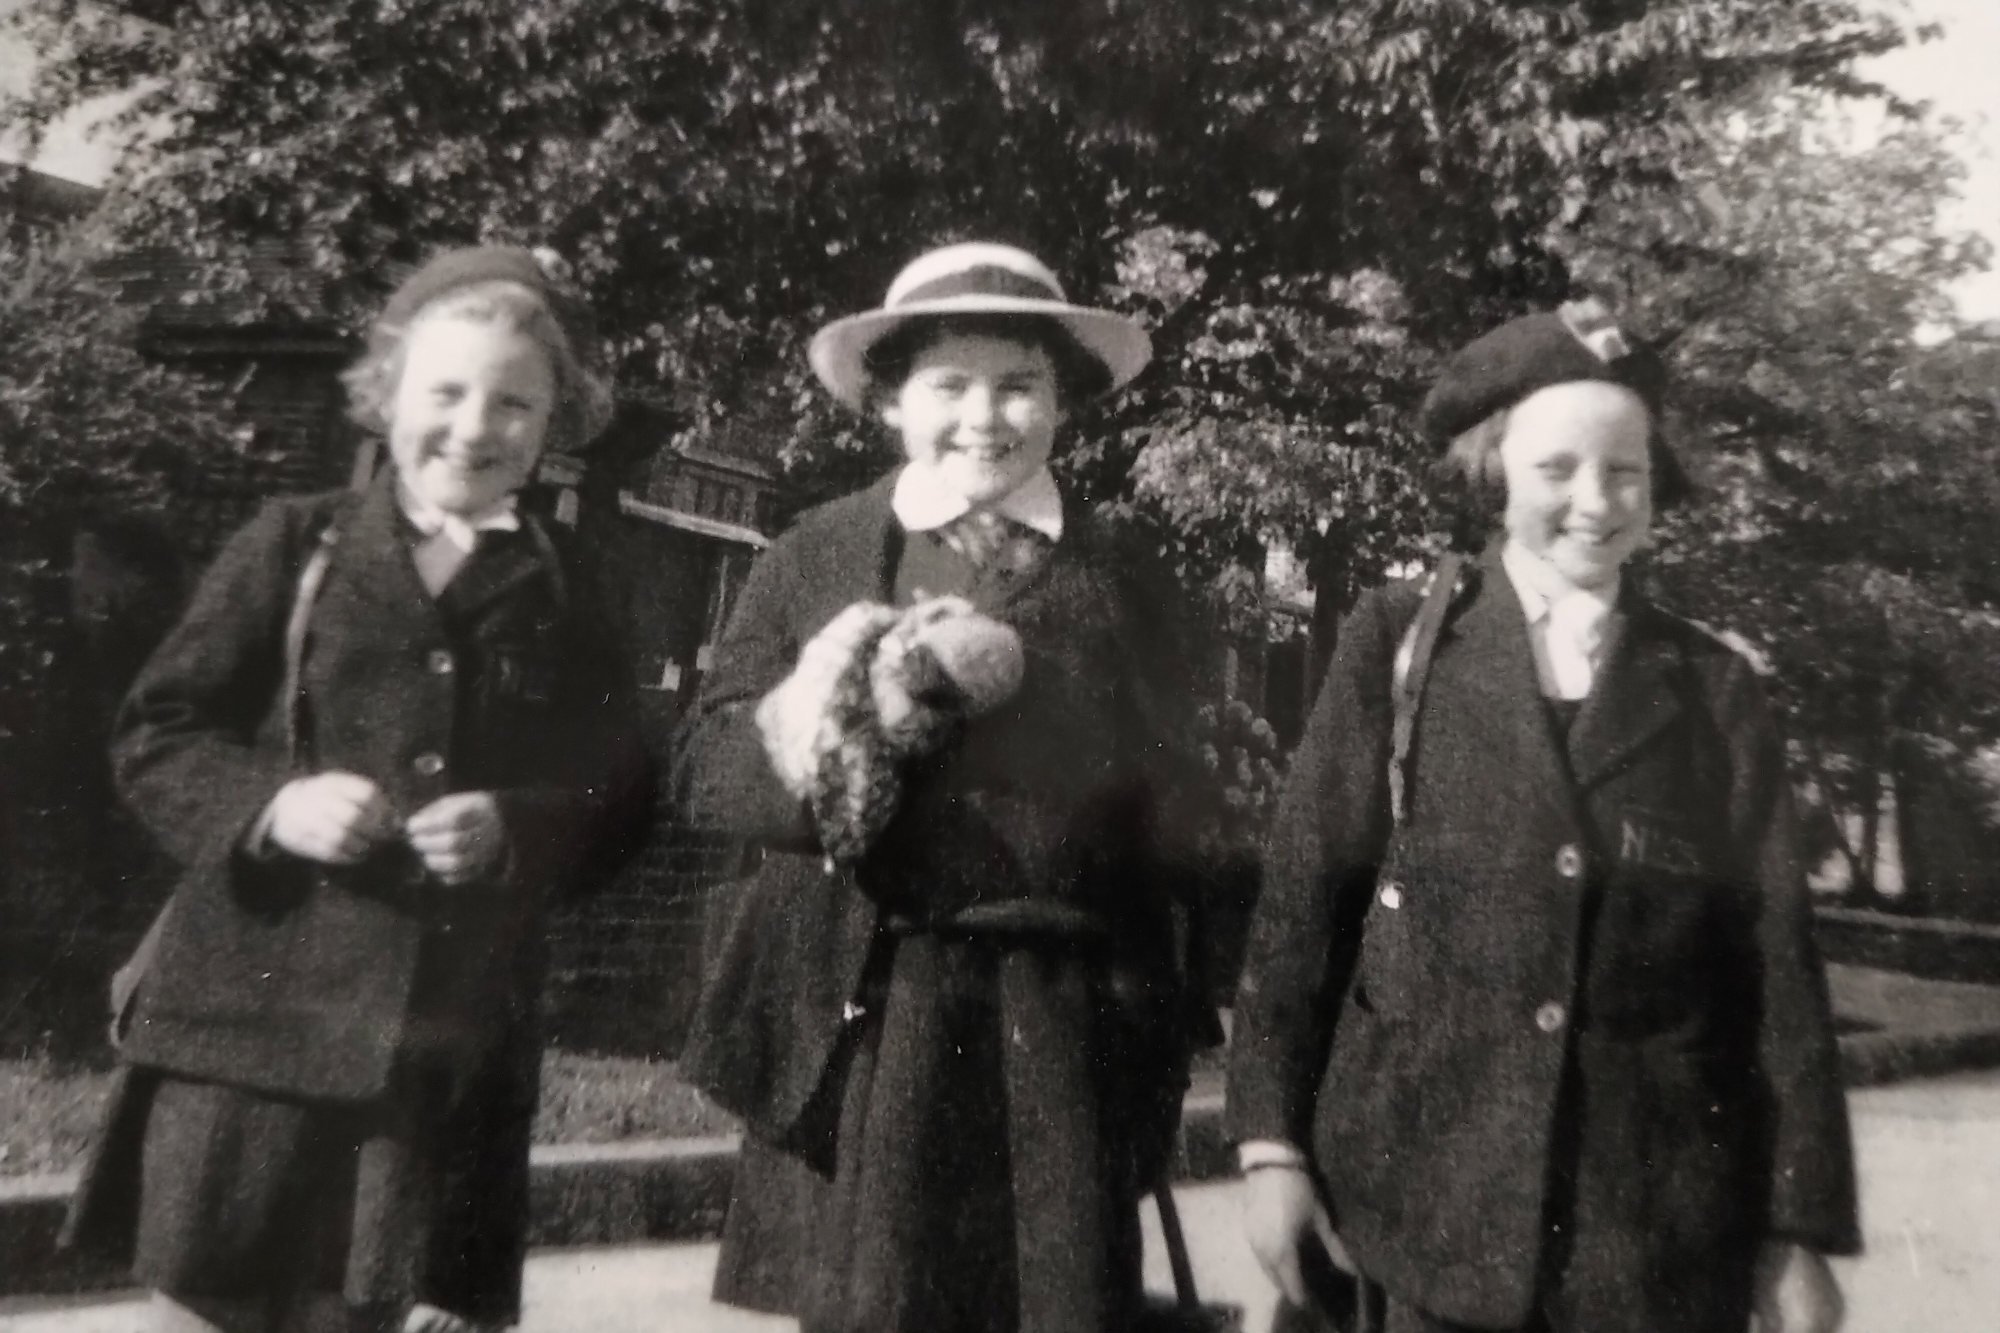 Goodwin (centre) while at school in Britain. Photo: courtesy of Elaine Goodwin